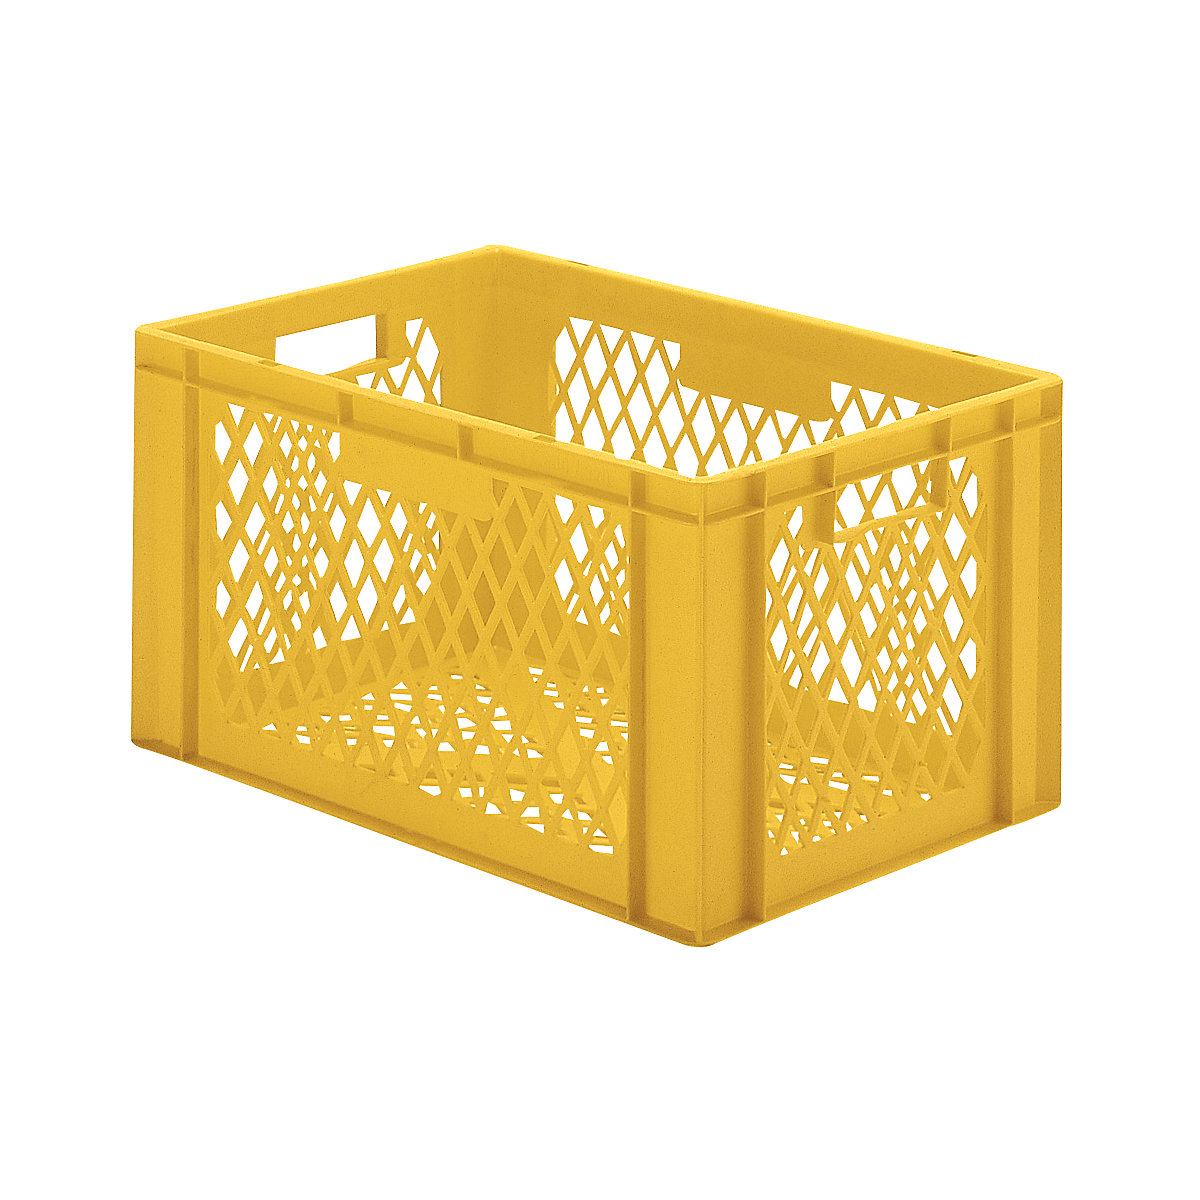 Euro stacking container, perforated walls and base, LxWxH 600 x 400 x 320 mm, yellow, pack of 5